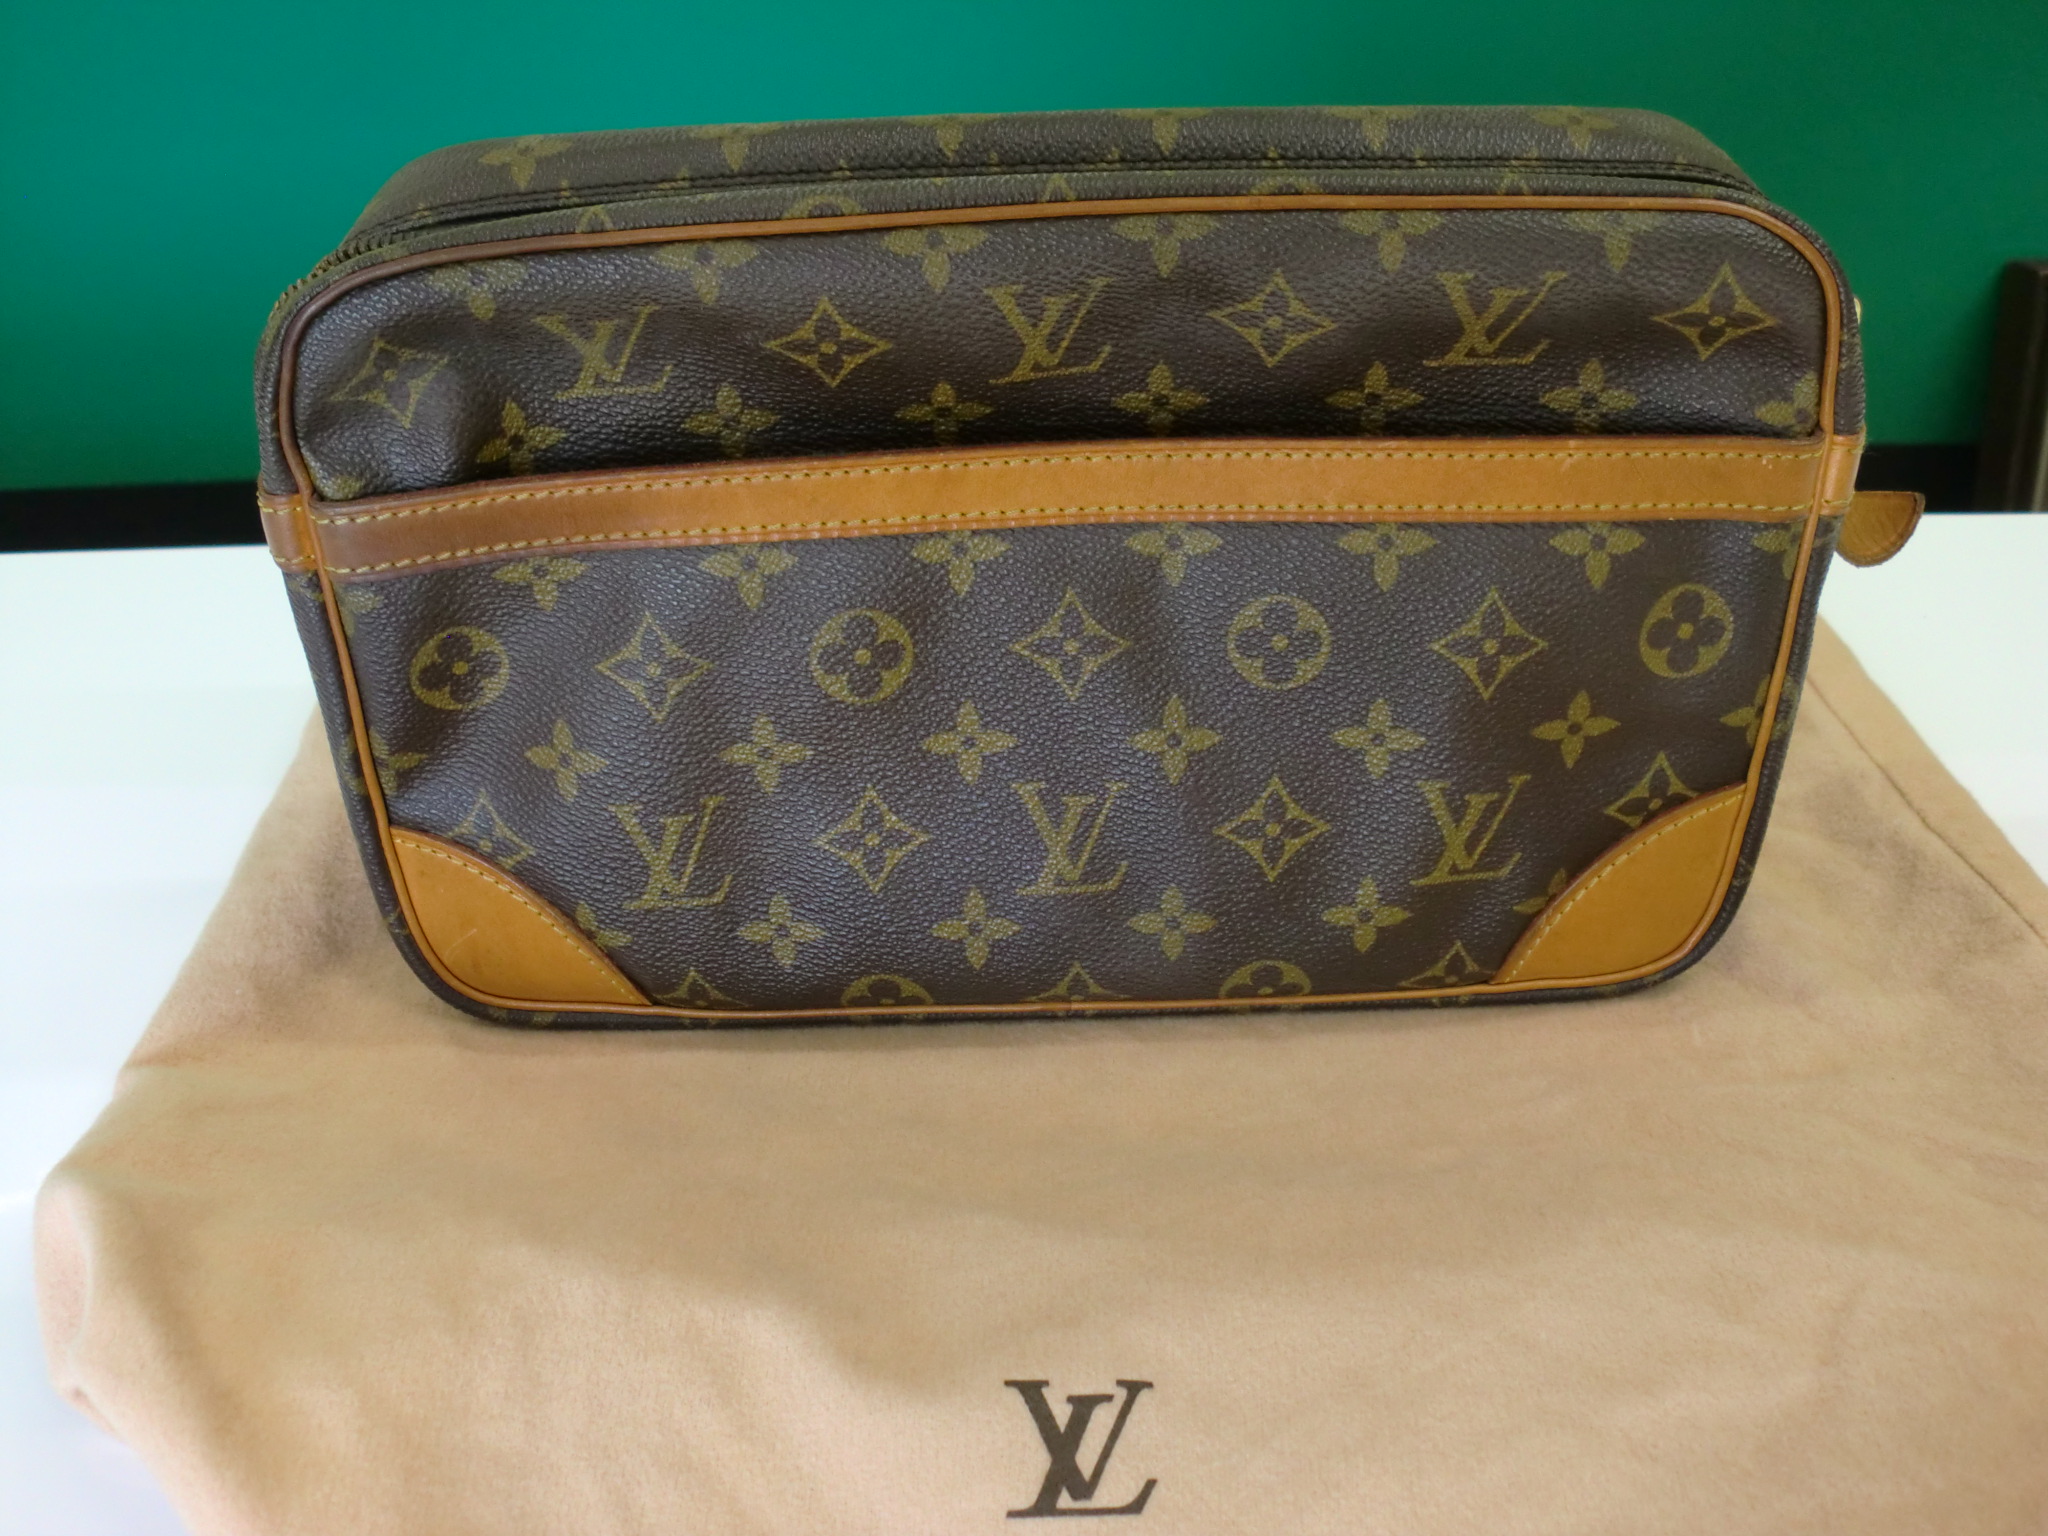 LOUIS VUITTON ルイヴィトン  モノグラムセカンドバッグ コンピエーニュ M51845